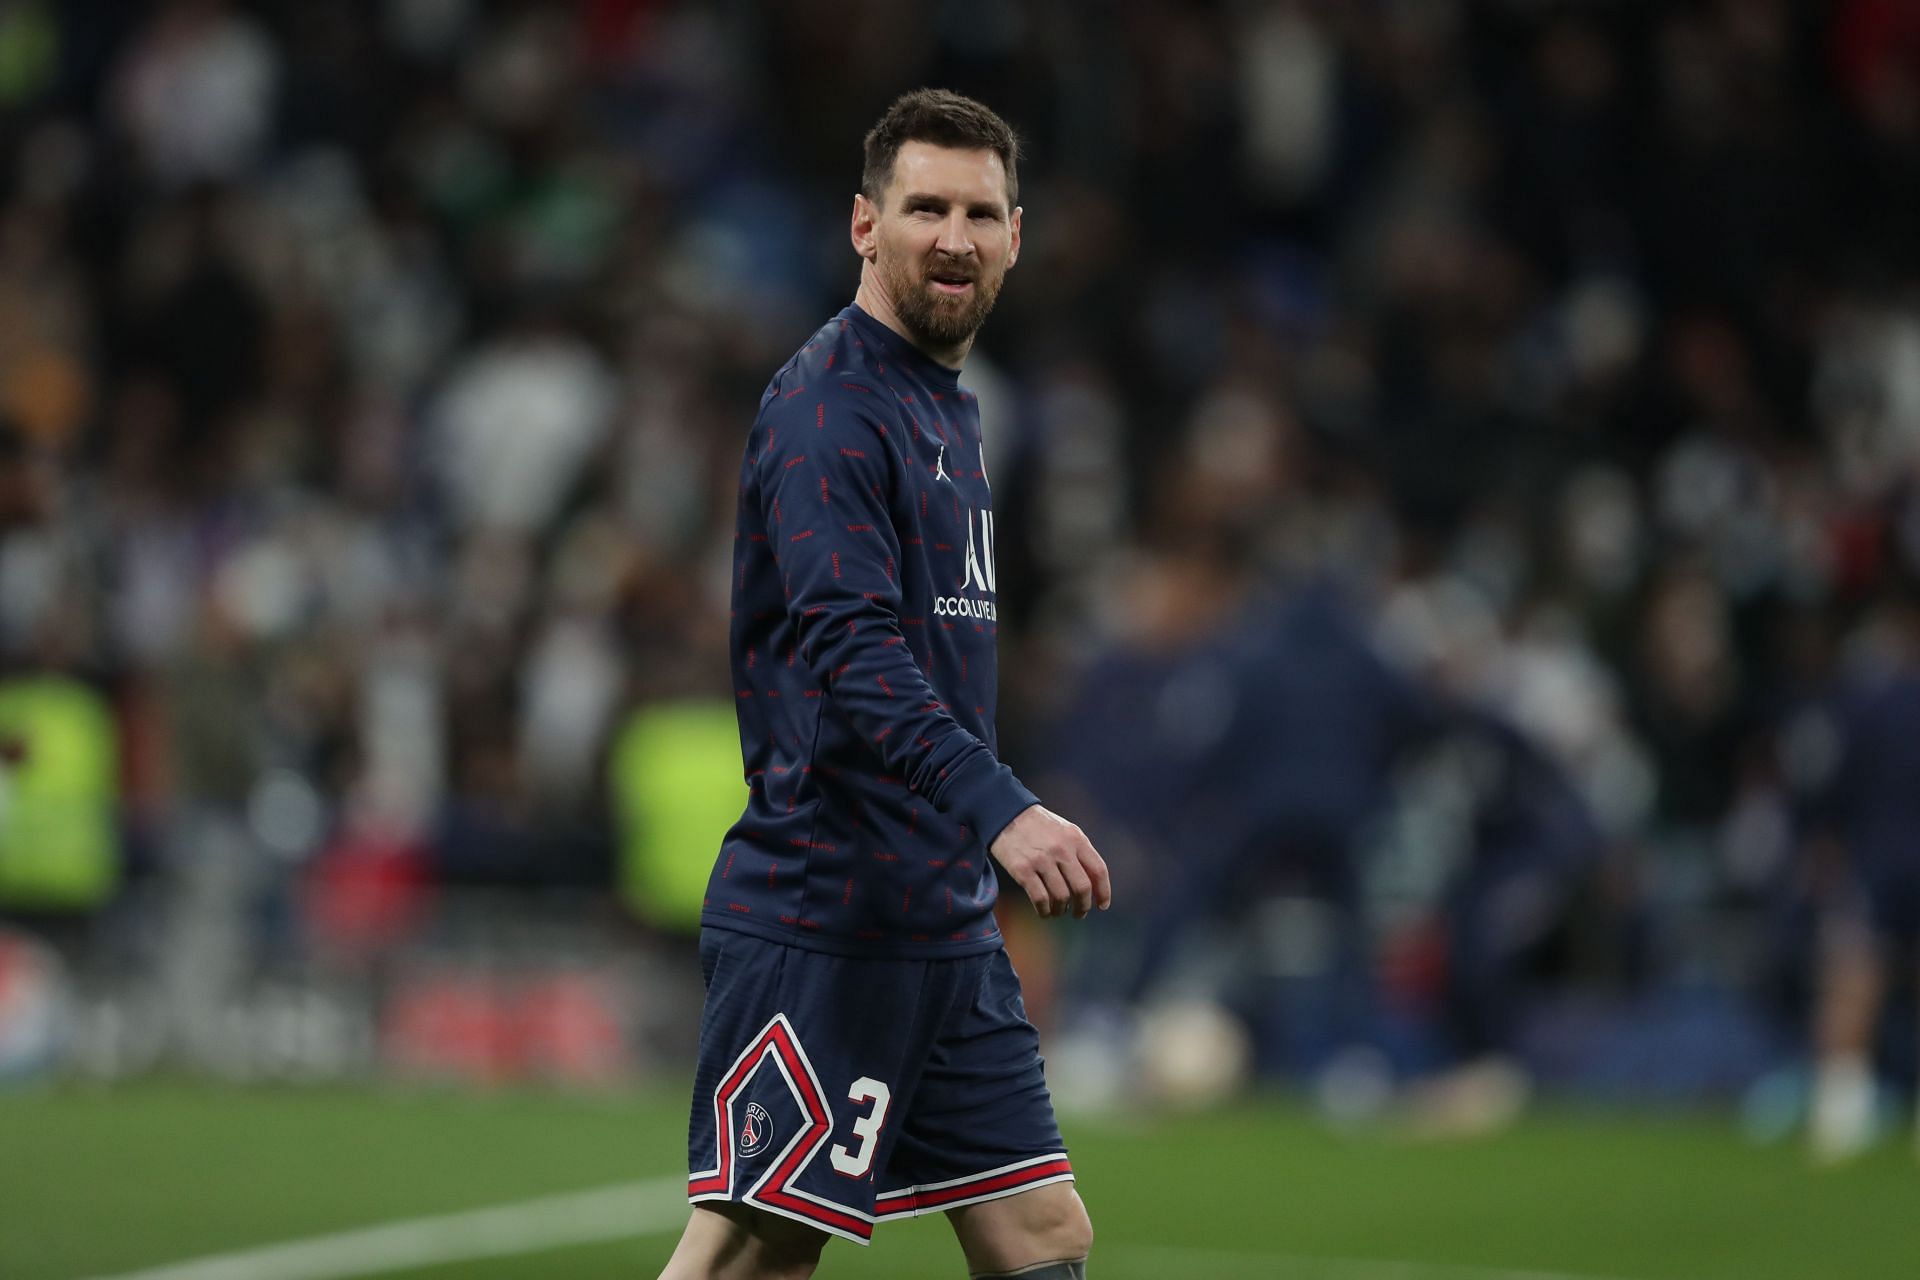 Lionel Messi has experienced difficulties since arriving at the Parc des Princes.